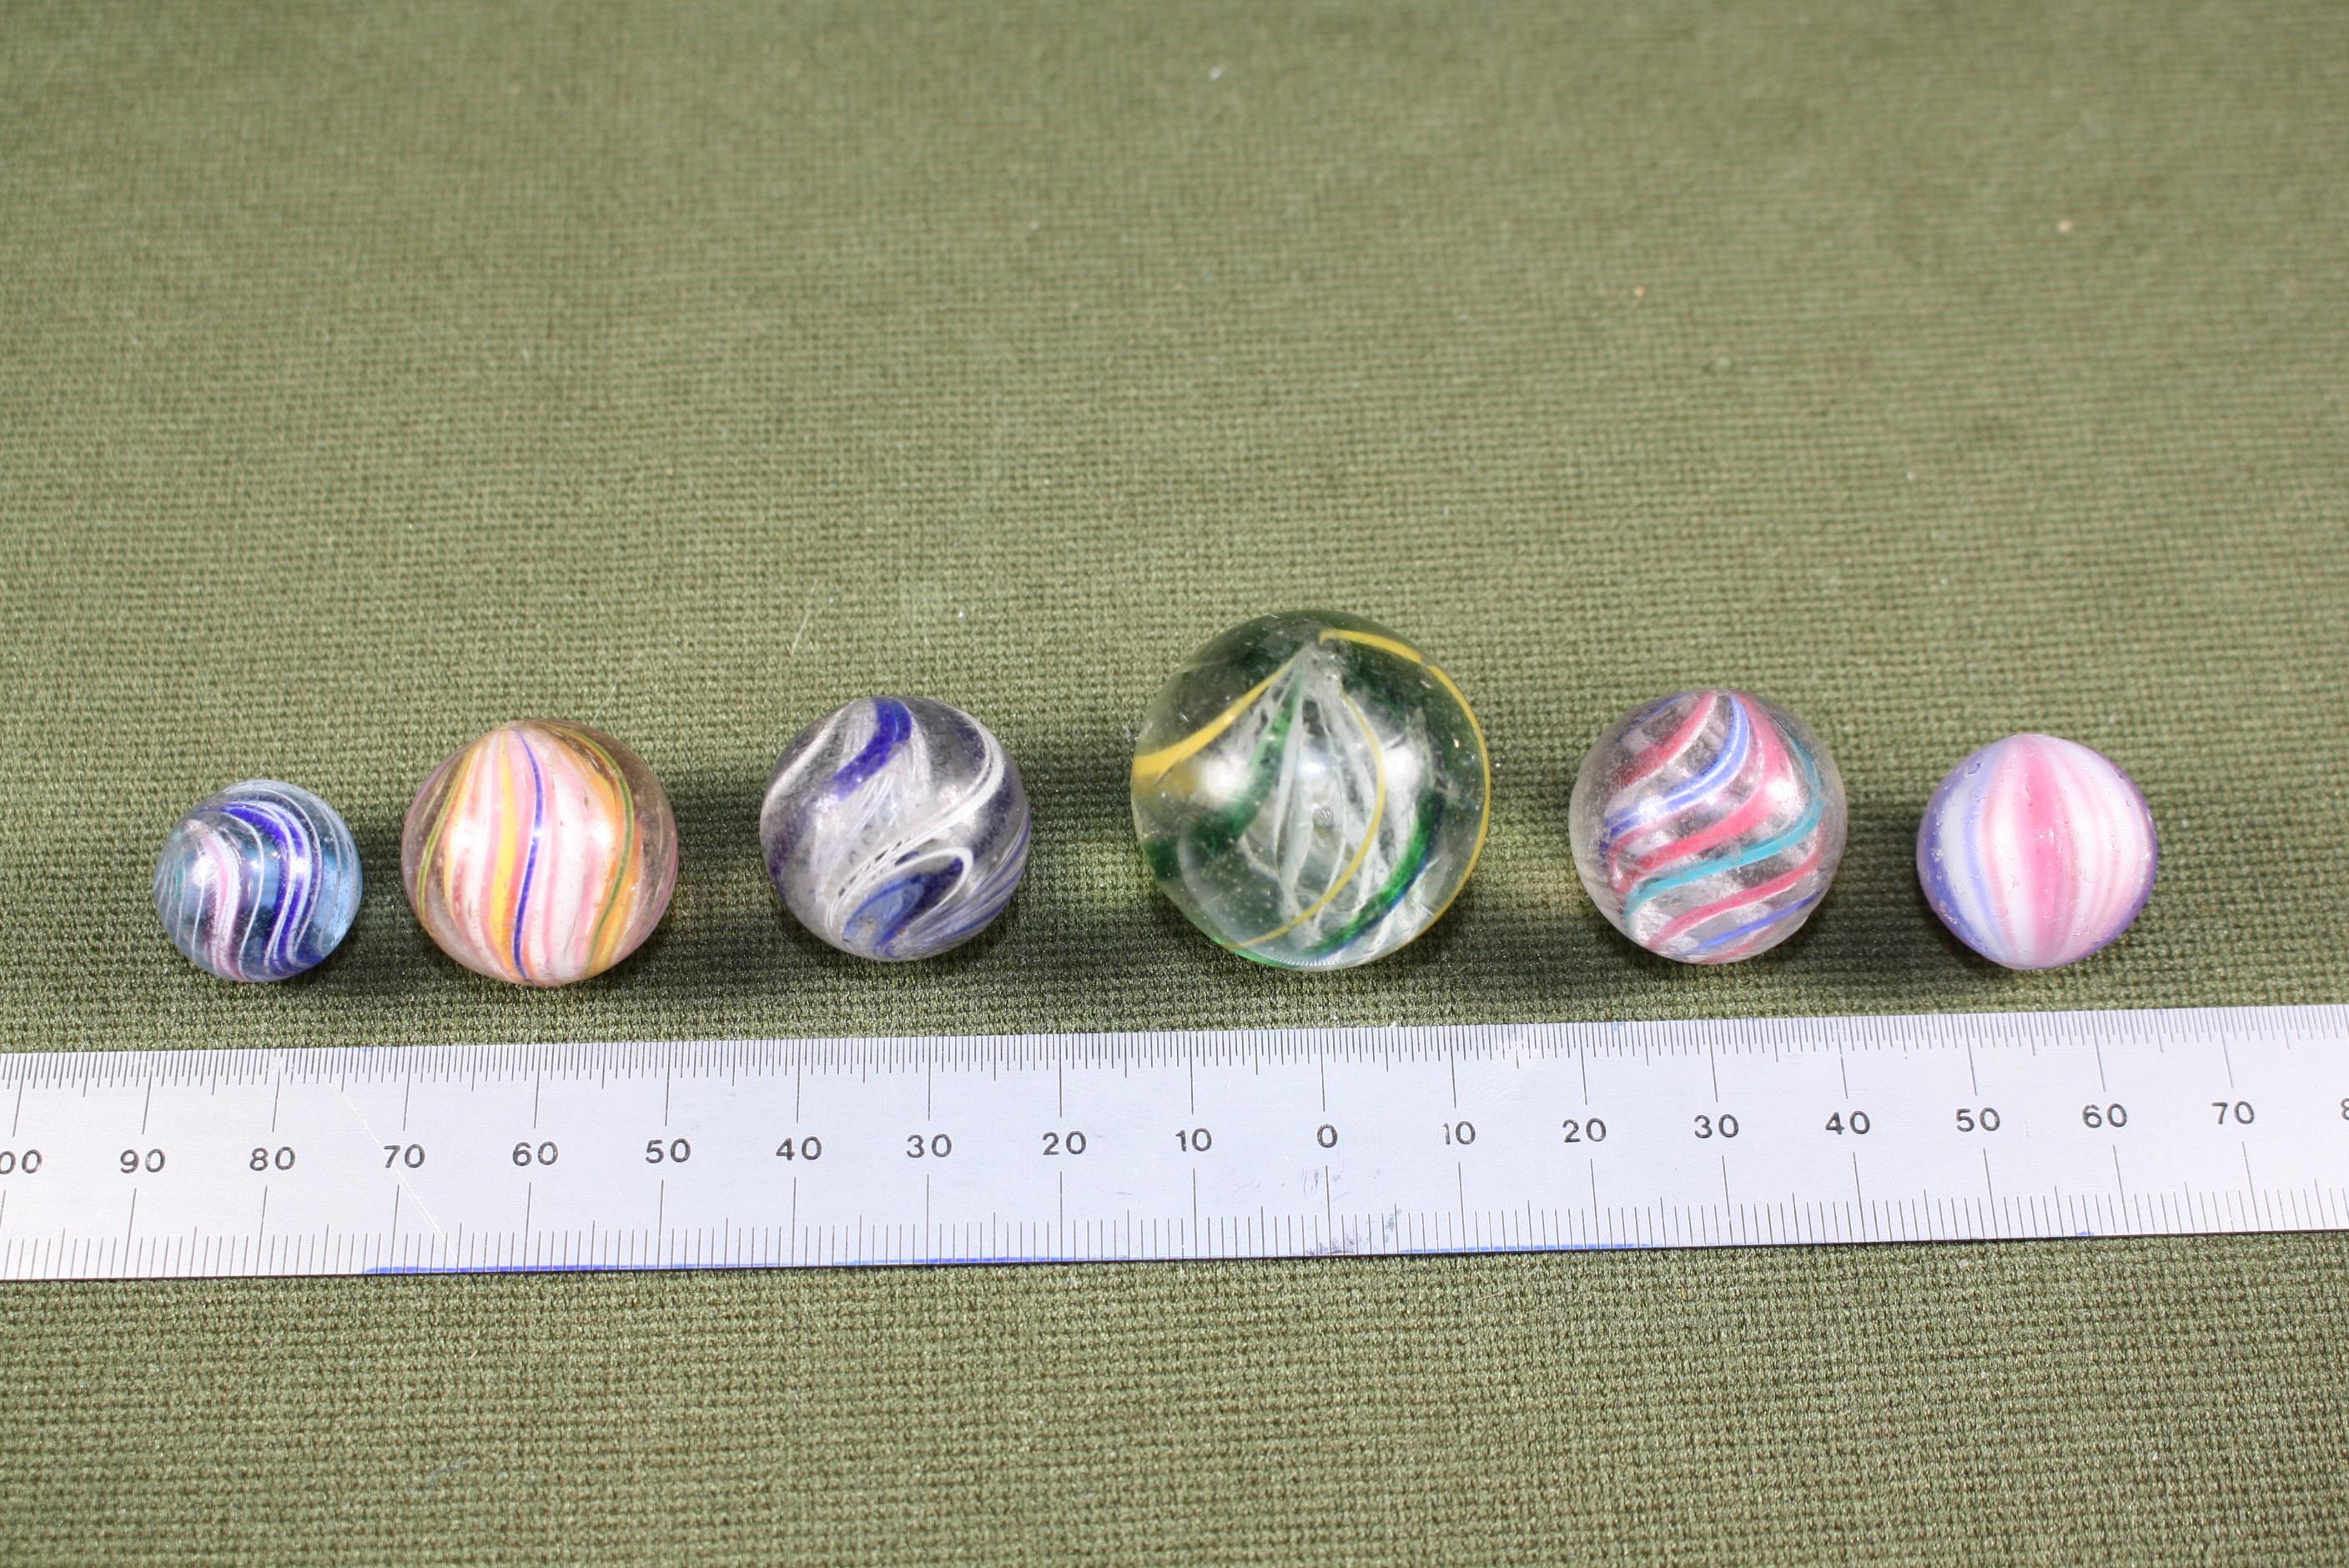 Lot of antique glass marbles.